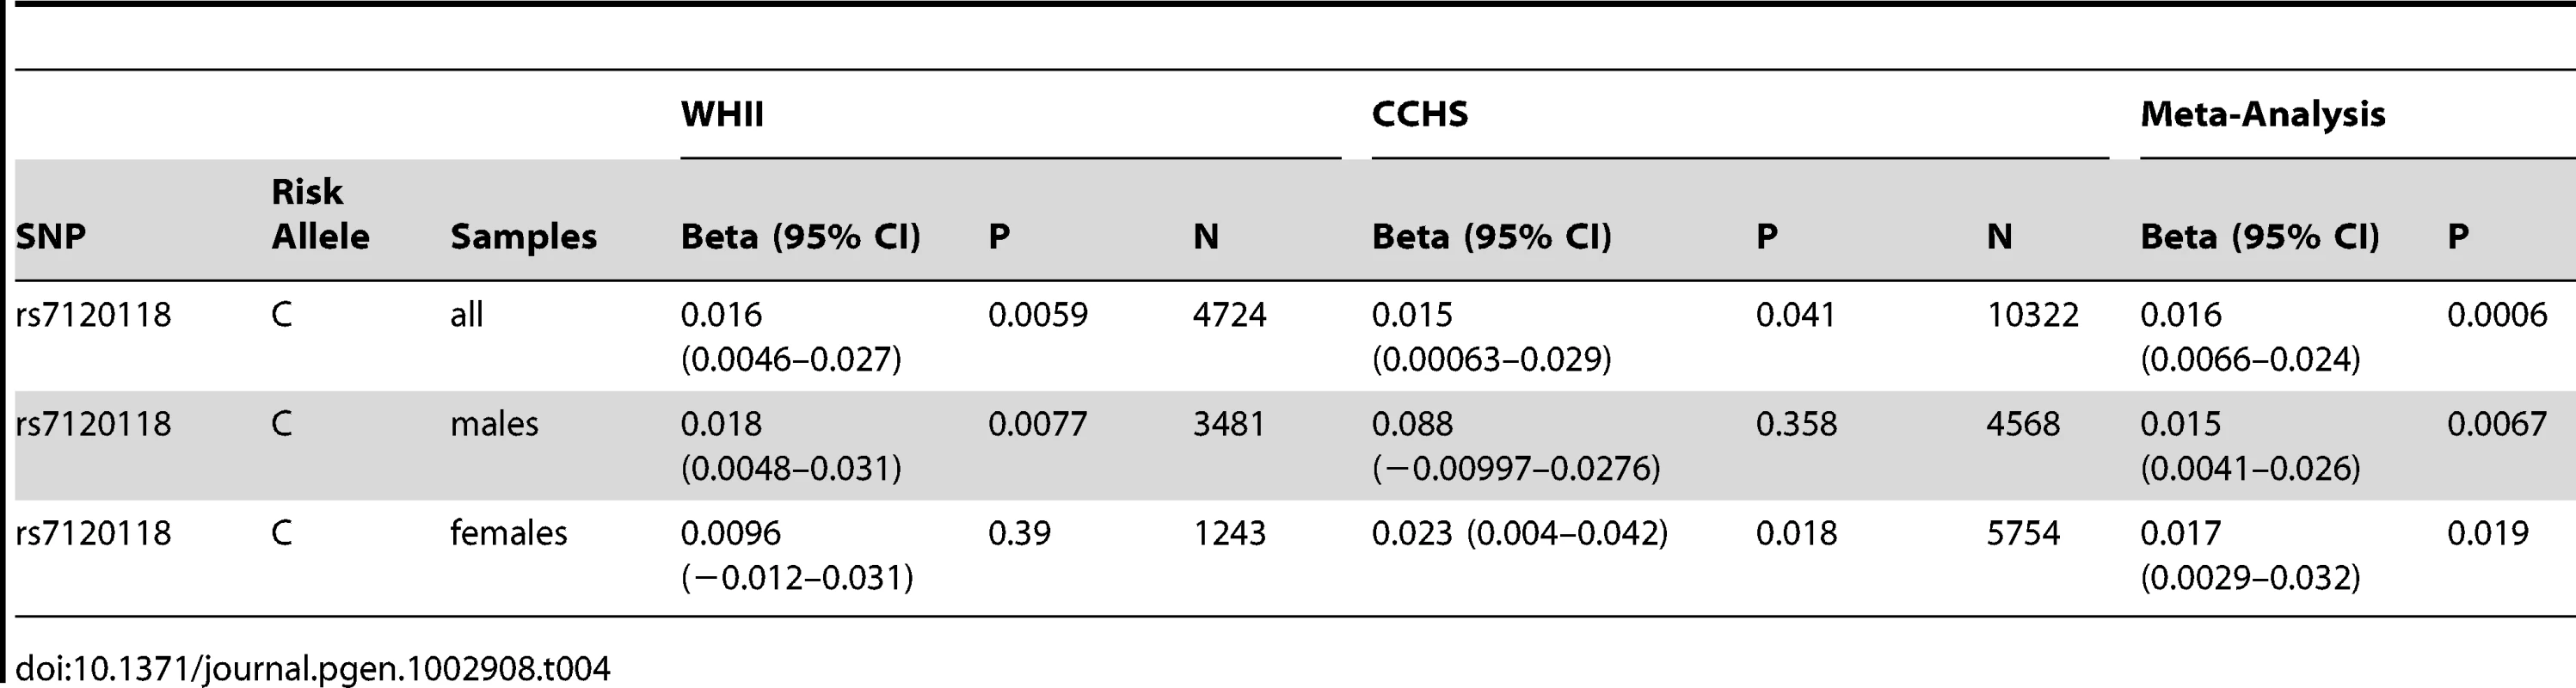 Meta-analysis using fixed-effect model of associations of rs7120118 and HDL-C in CCHS and WHII, stratified by gender.